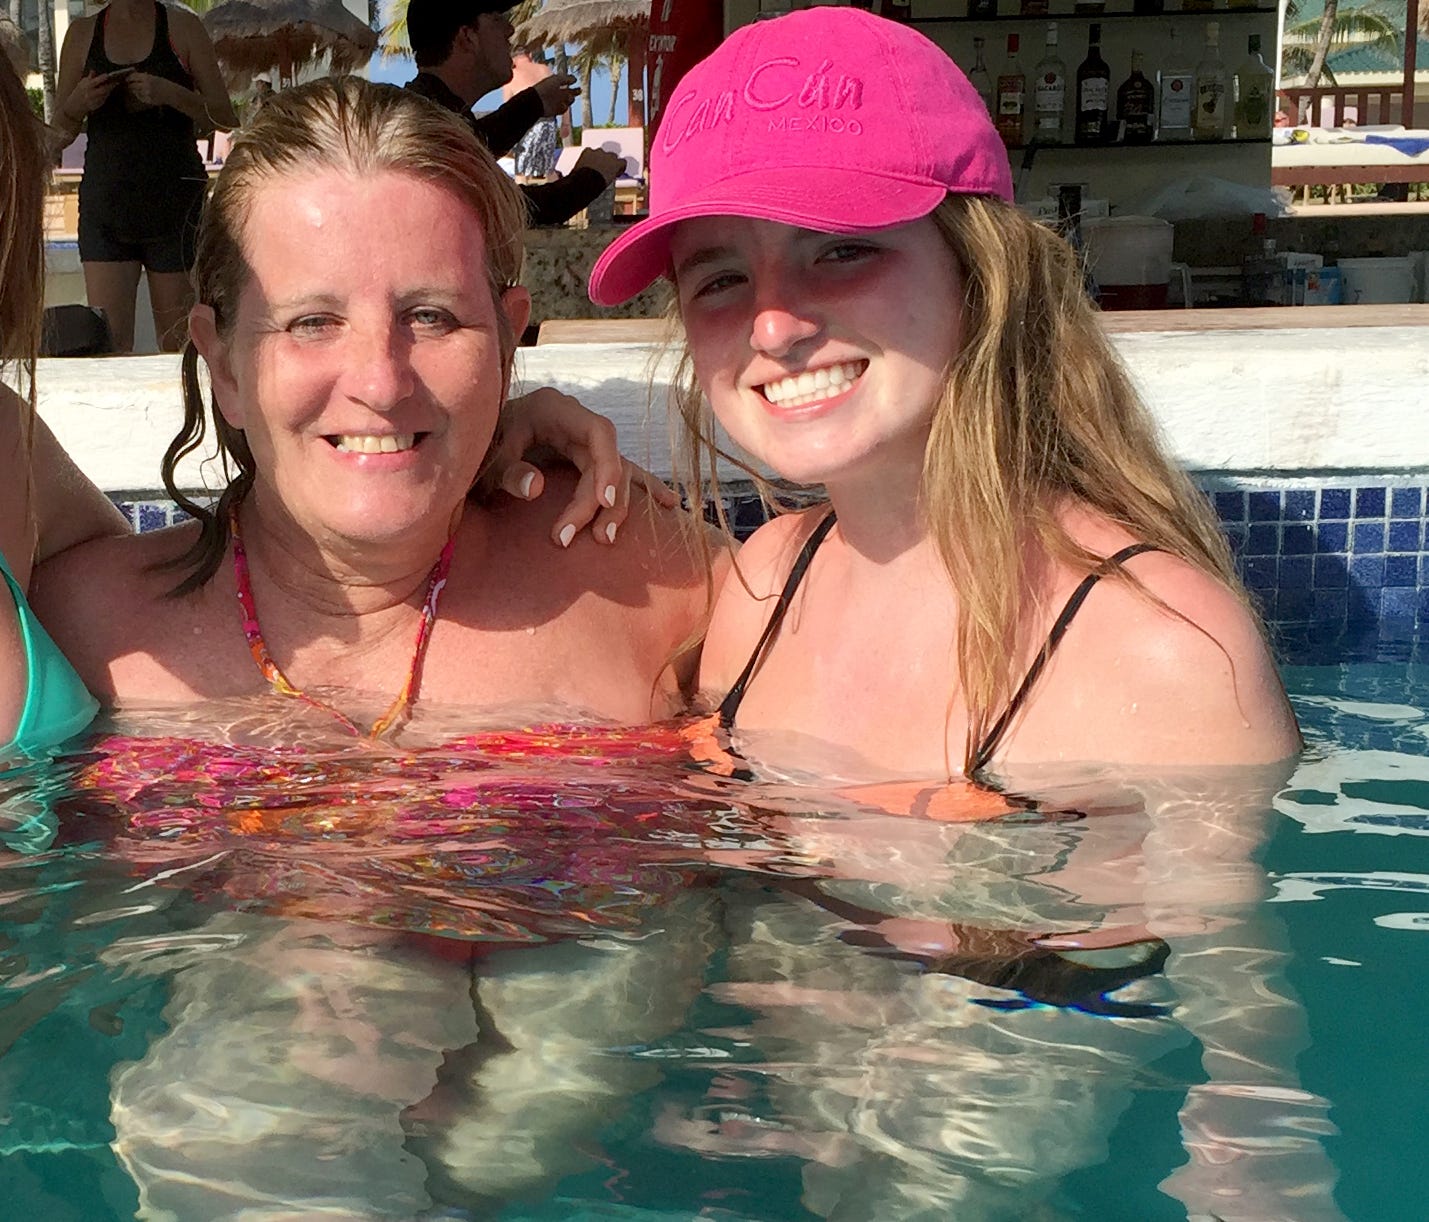 Kathy Daley (left) and her daughter Olivia Daley, 15, sit at the swim-up bar at the Cancun resort moments before Kathy Daley fell ill after having a drink at the bar.  Kathy Daley, her husband and their two teenage children traveled to Iberostar Canc